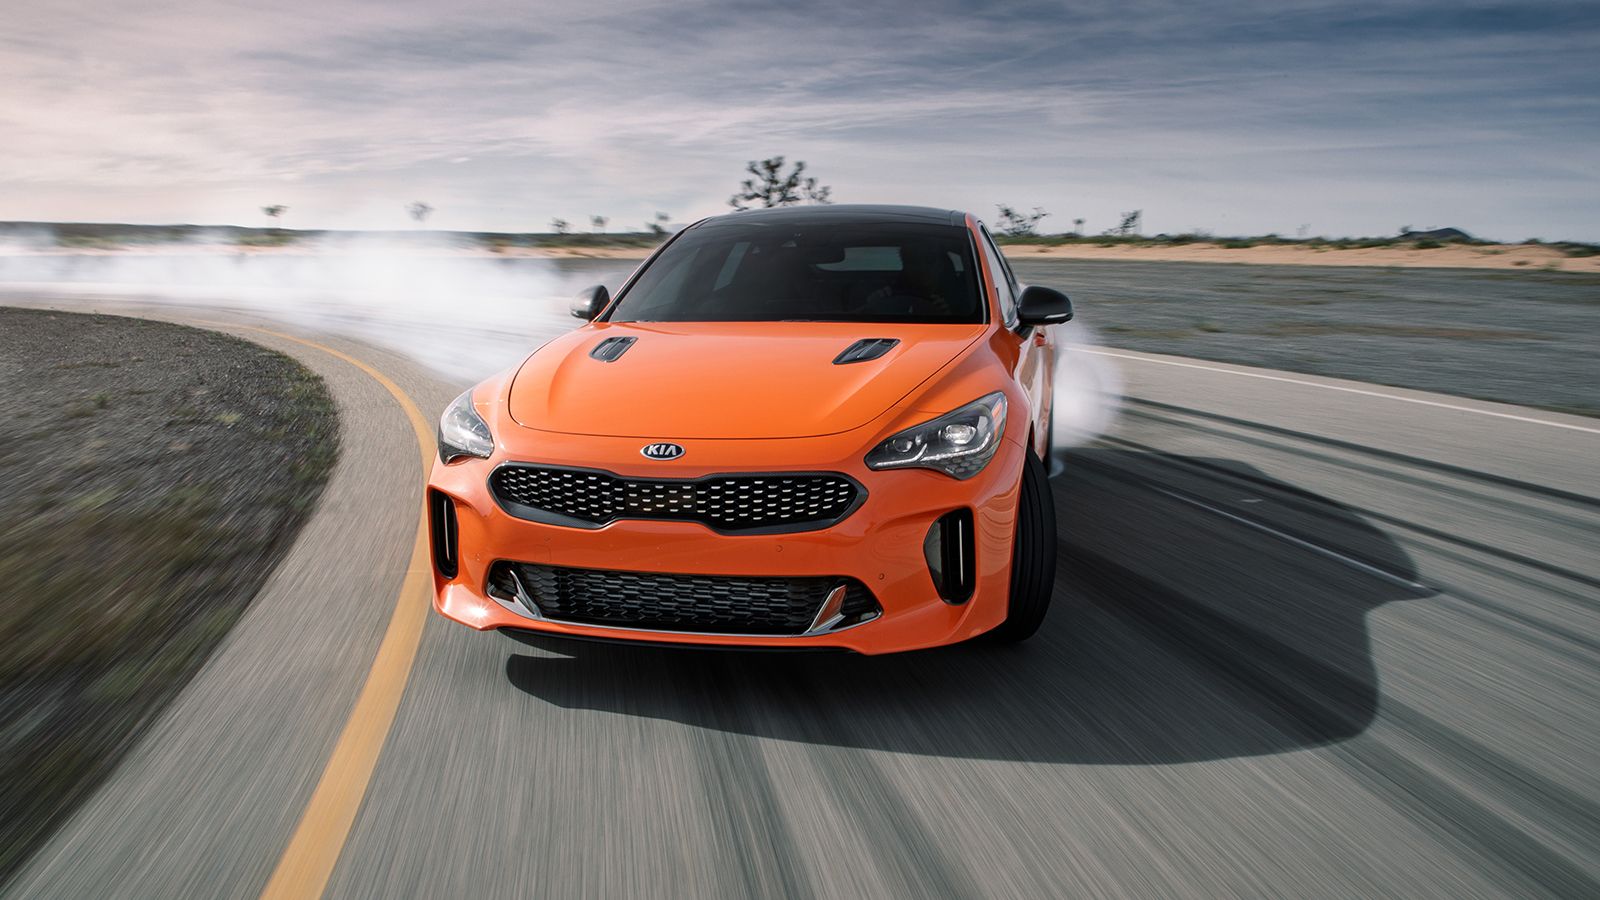 Will The Kia Stinger Be A One Hit Wonder